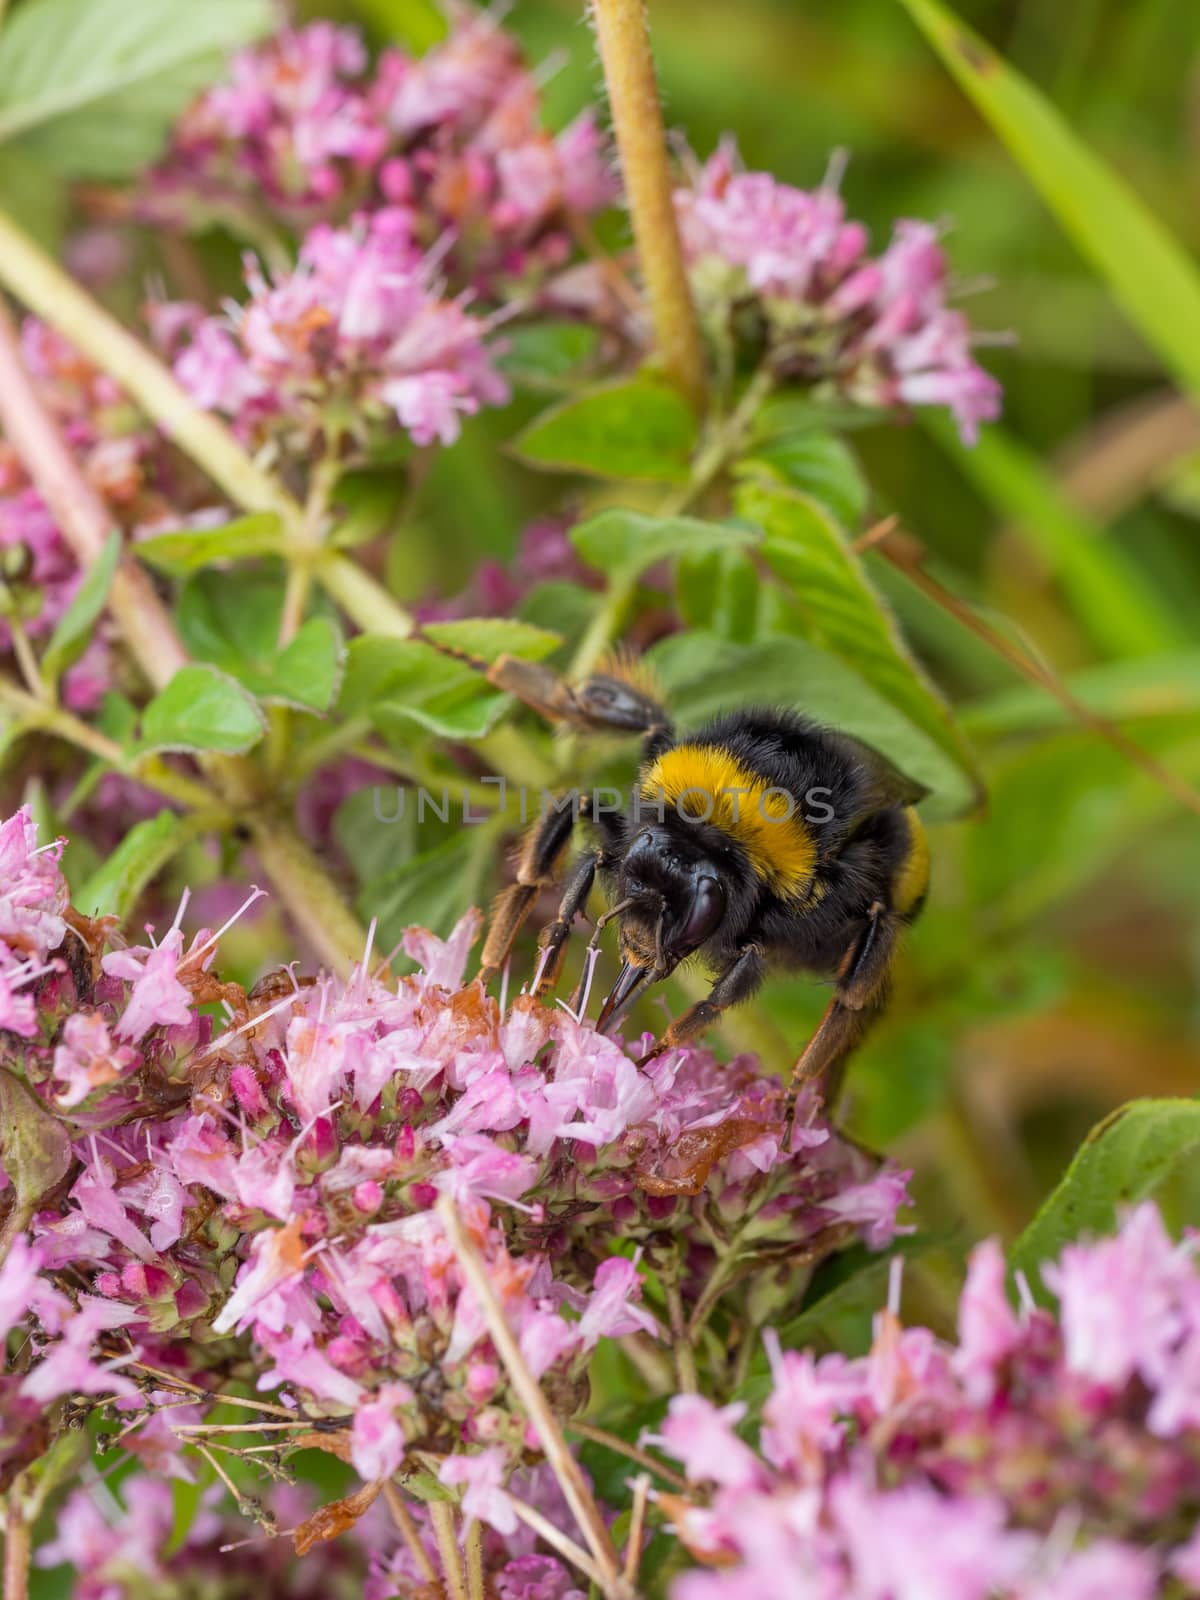 Bumblebee on wild pink flowers by frankhoekzema